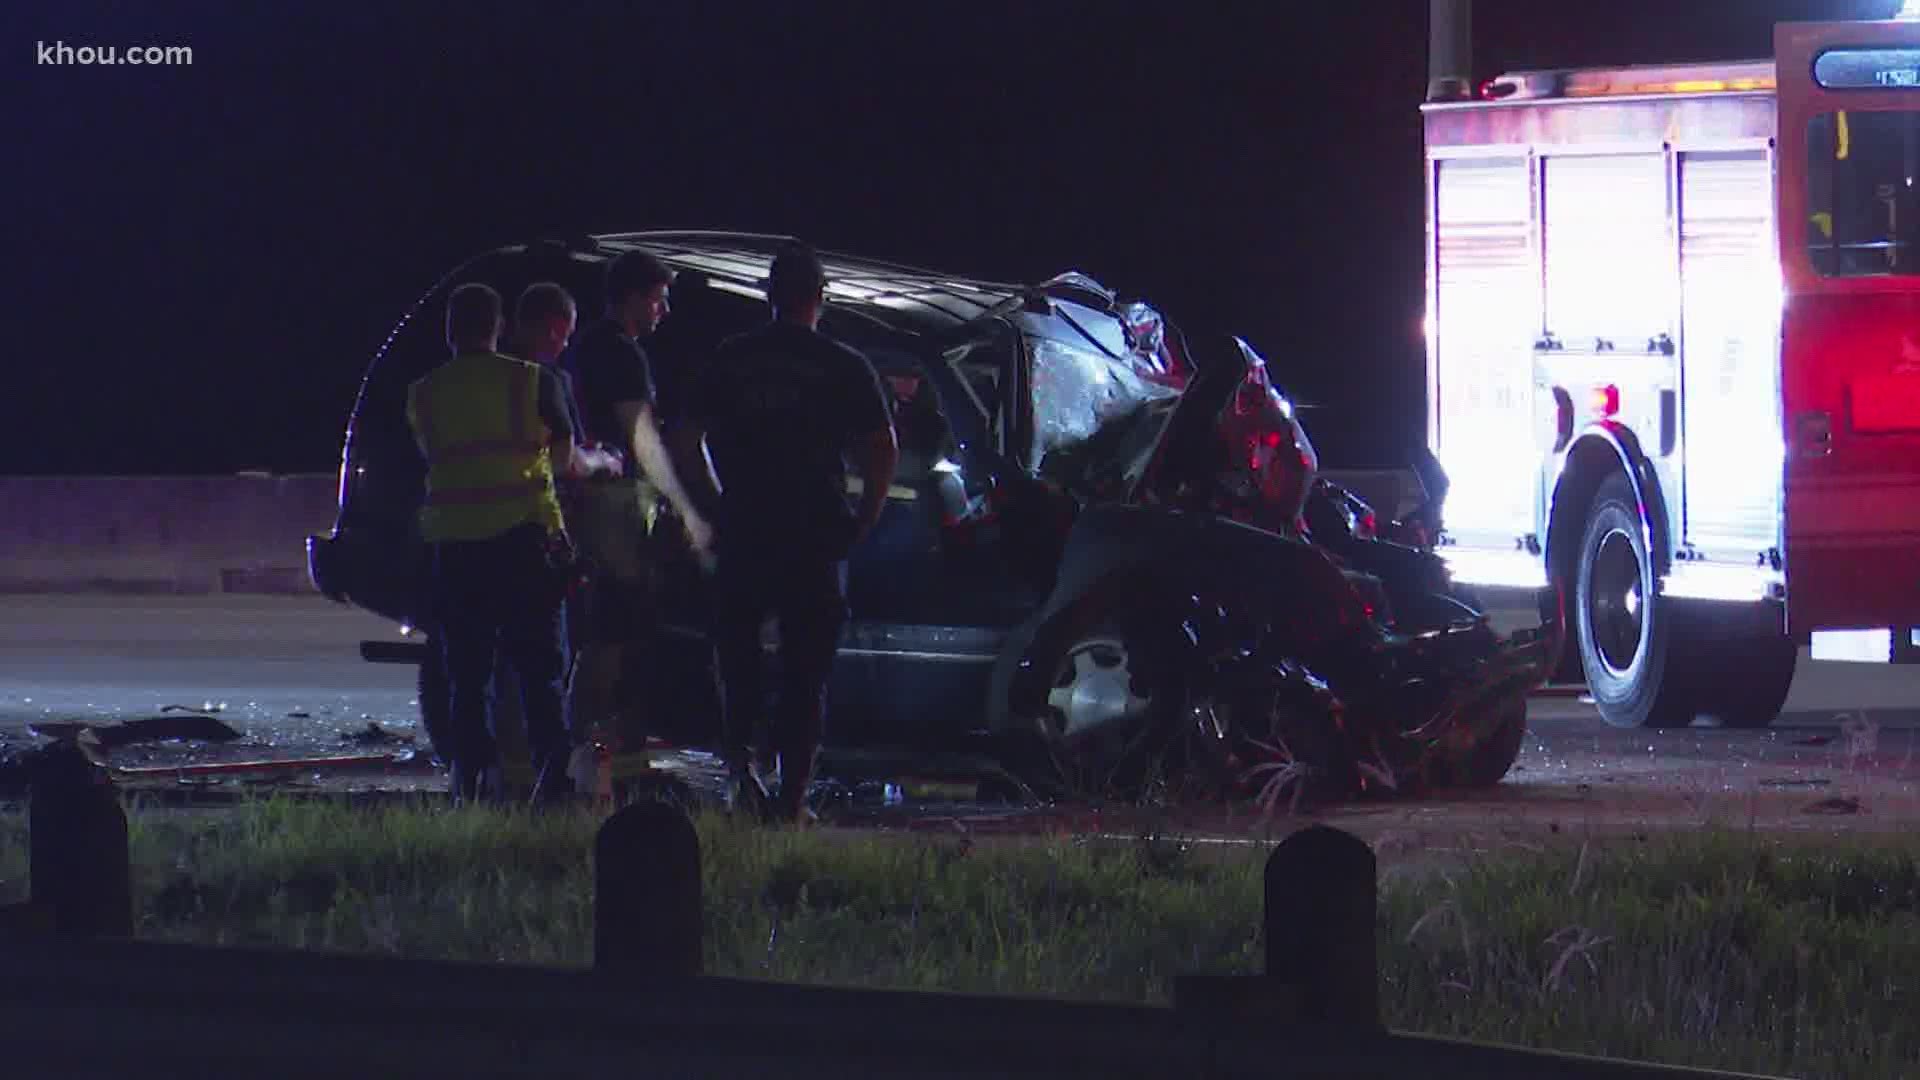 Local authorities investigating two deadly crashes early Wednesday on Beltway 8, one on the west and the other on the north side of town.